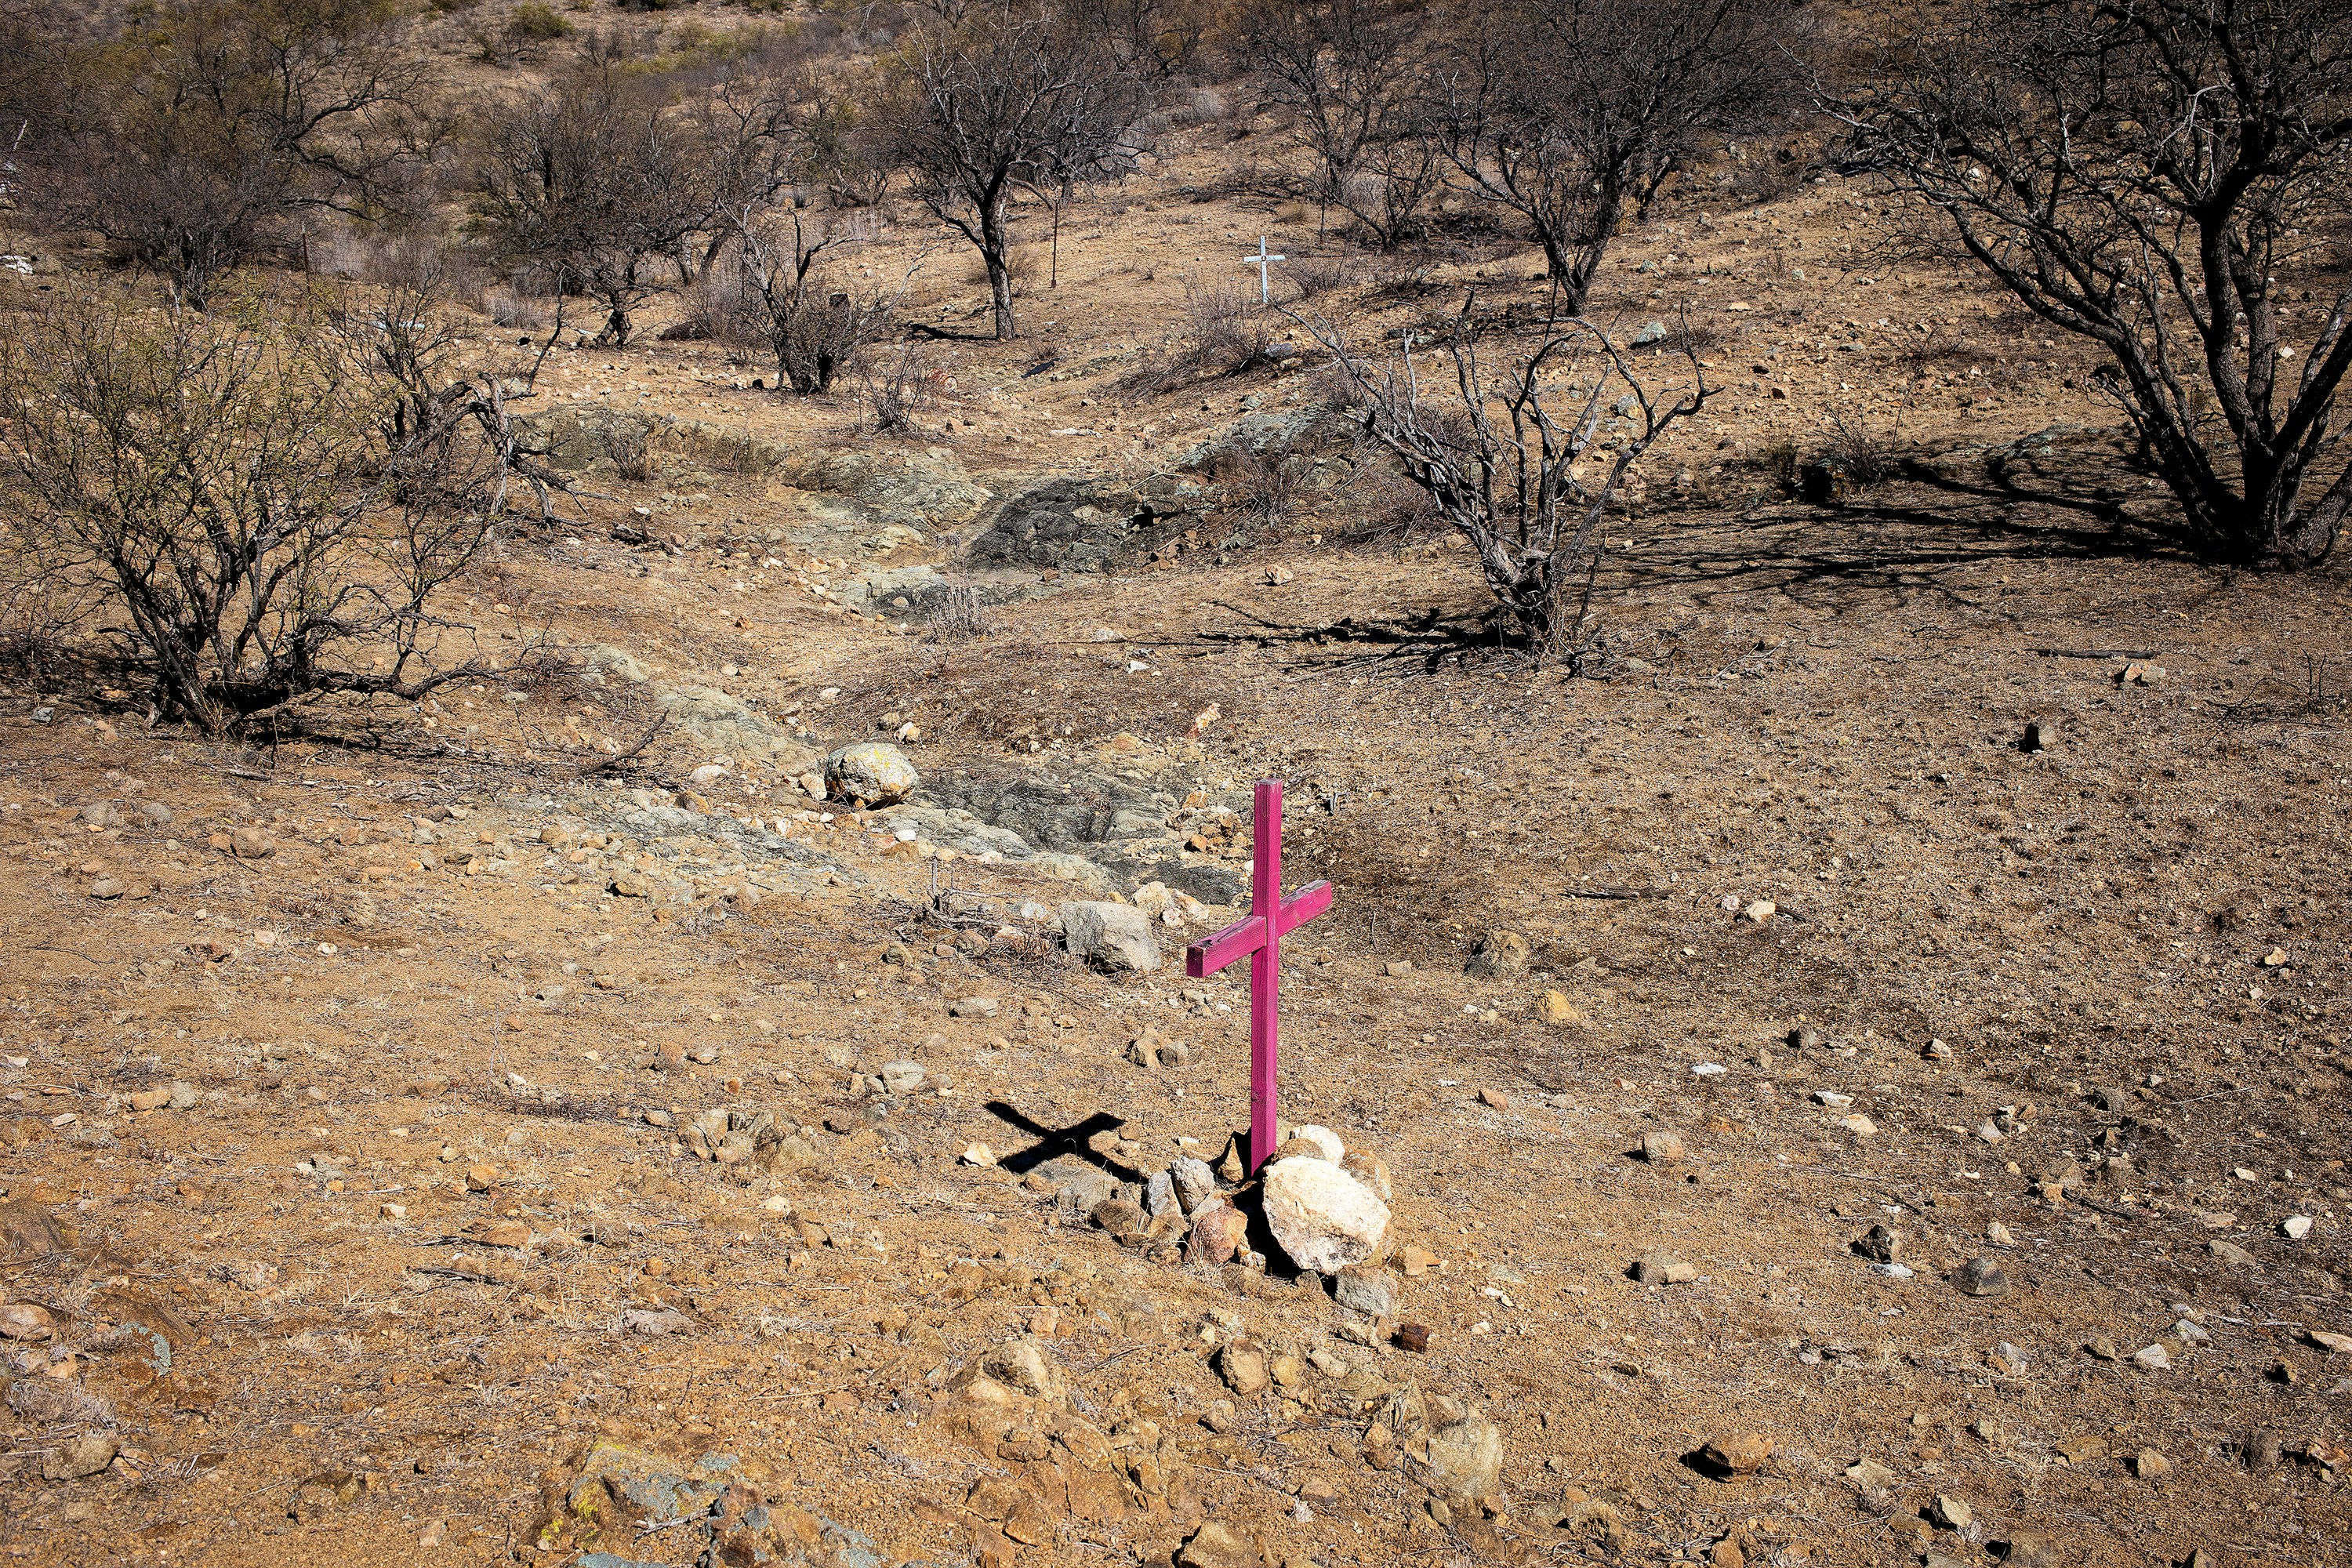 ALTAR VALLEY, ARIZONA- JANUARY 28: Crosses left by border activists mark the locations where the remains of migrants who died trying to cross into the United States through the harsh conditions of the Sonoran Desert were discovered, January 28, 2021 in the Altar Valley, Arizona. Over 220 deaths were reported in this section of the desert in 2020 and the number is probably much higher. (Photo by Andrew Lichtenstein/Corbis via Getty Images)